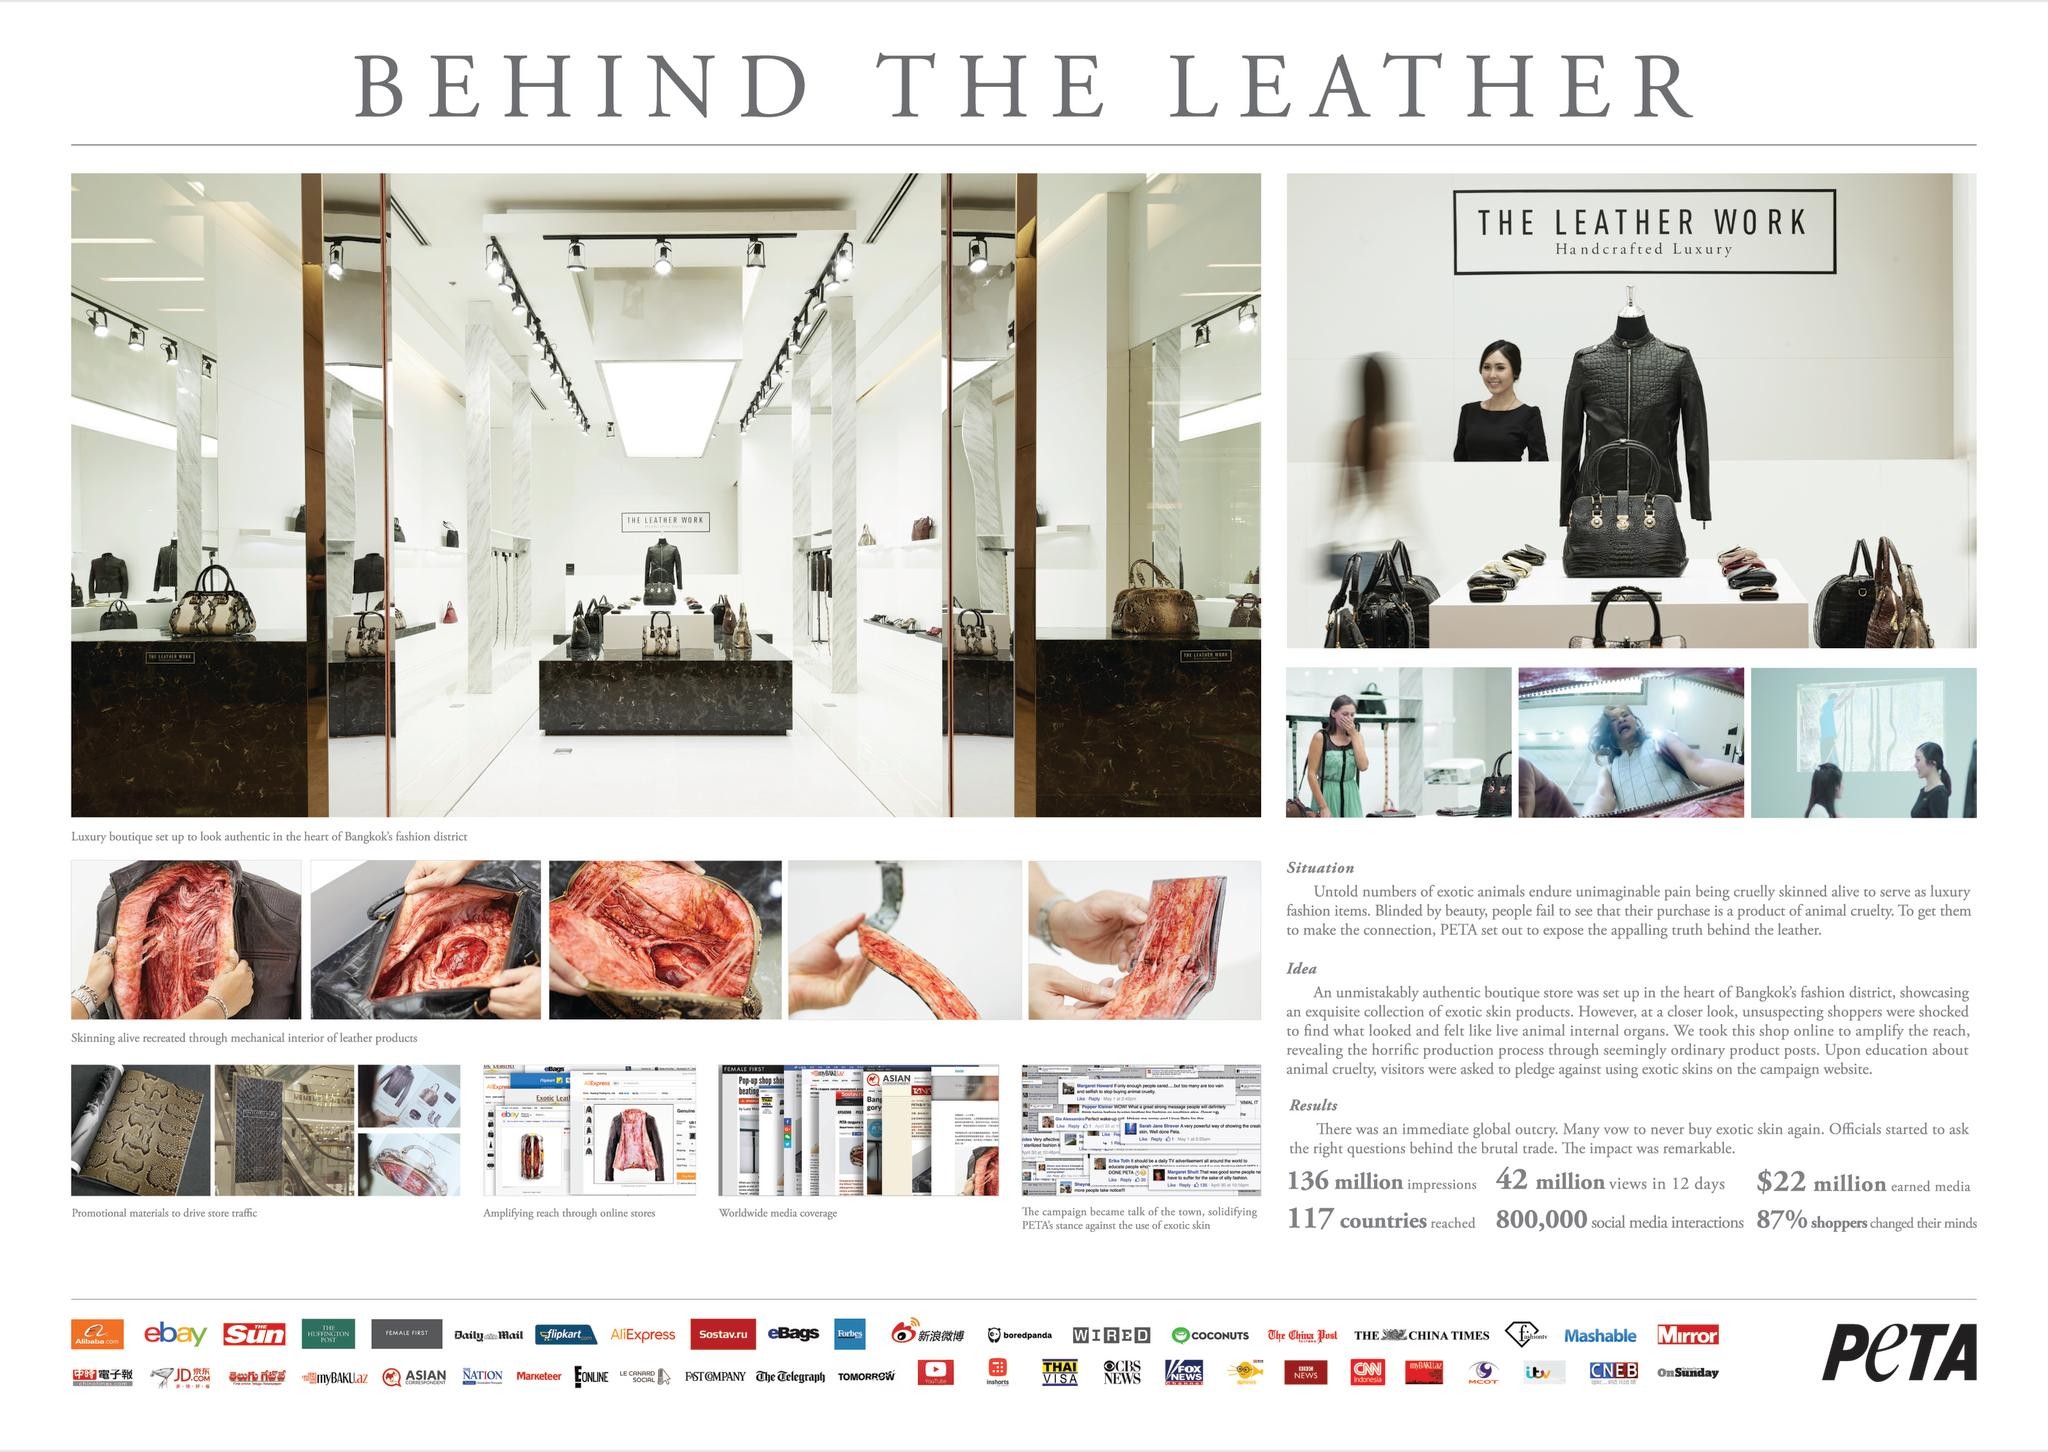 Behind the leather